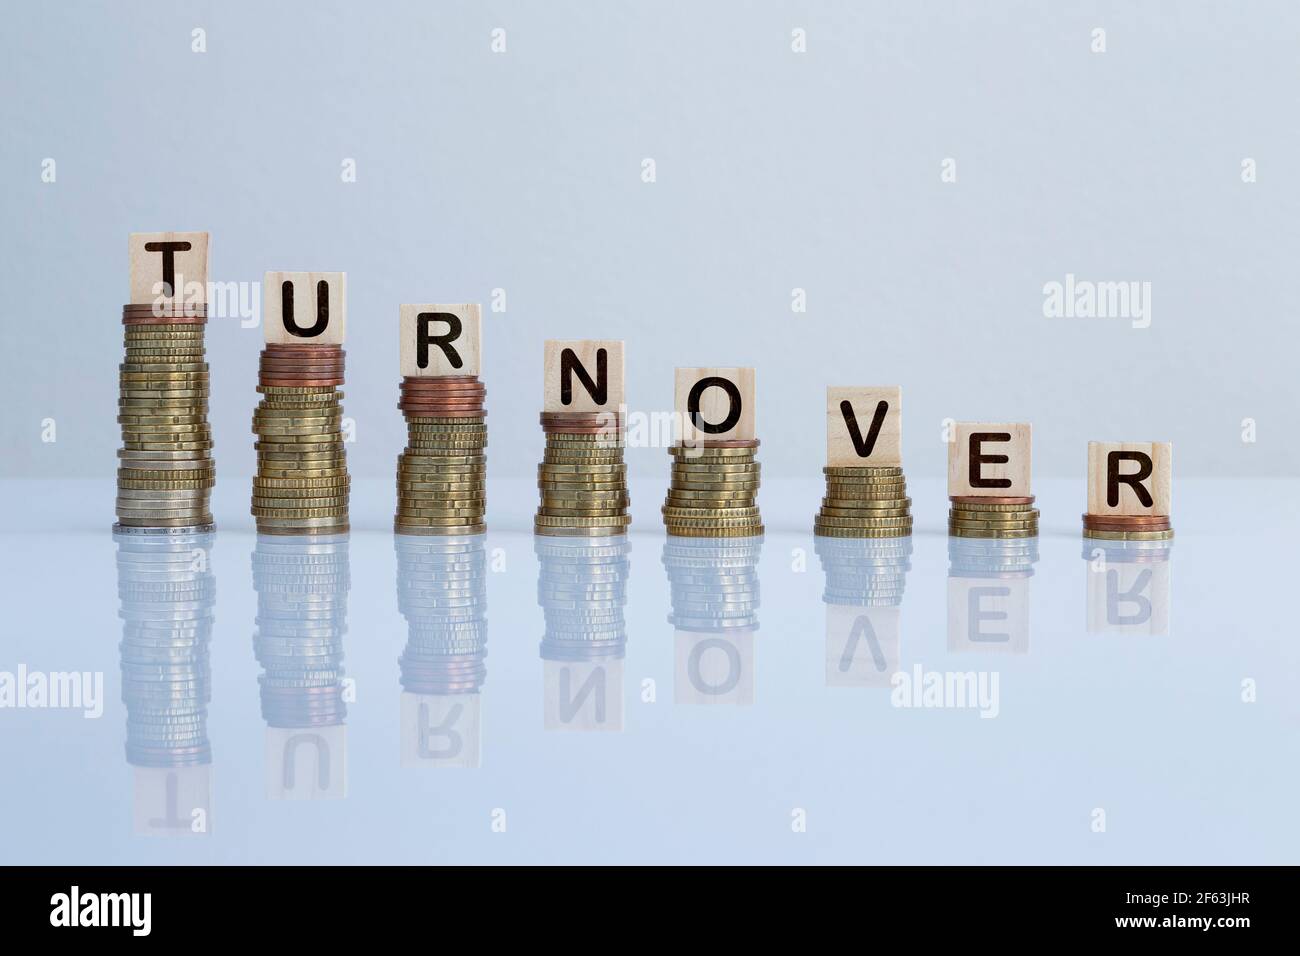 Word 'TURNOVER' on wooden blocks on top of descending stacks of coins. Concept photo of losing money, business crisis, recession&financial reduction. Stock Photo